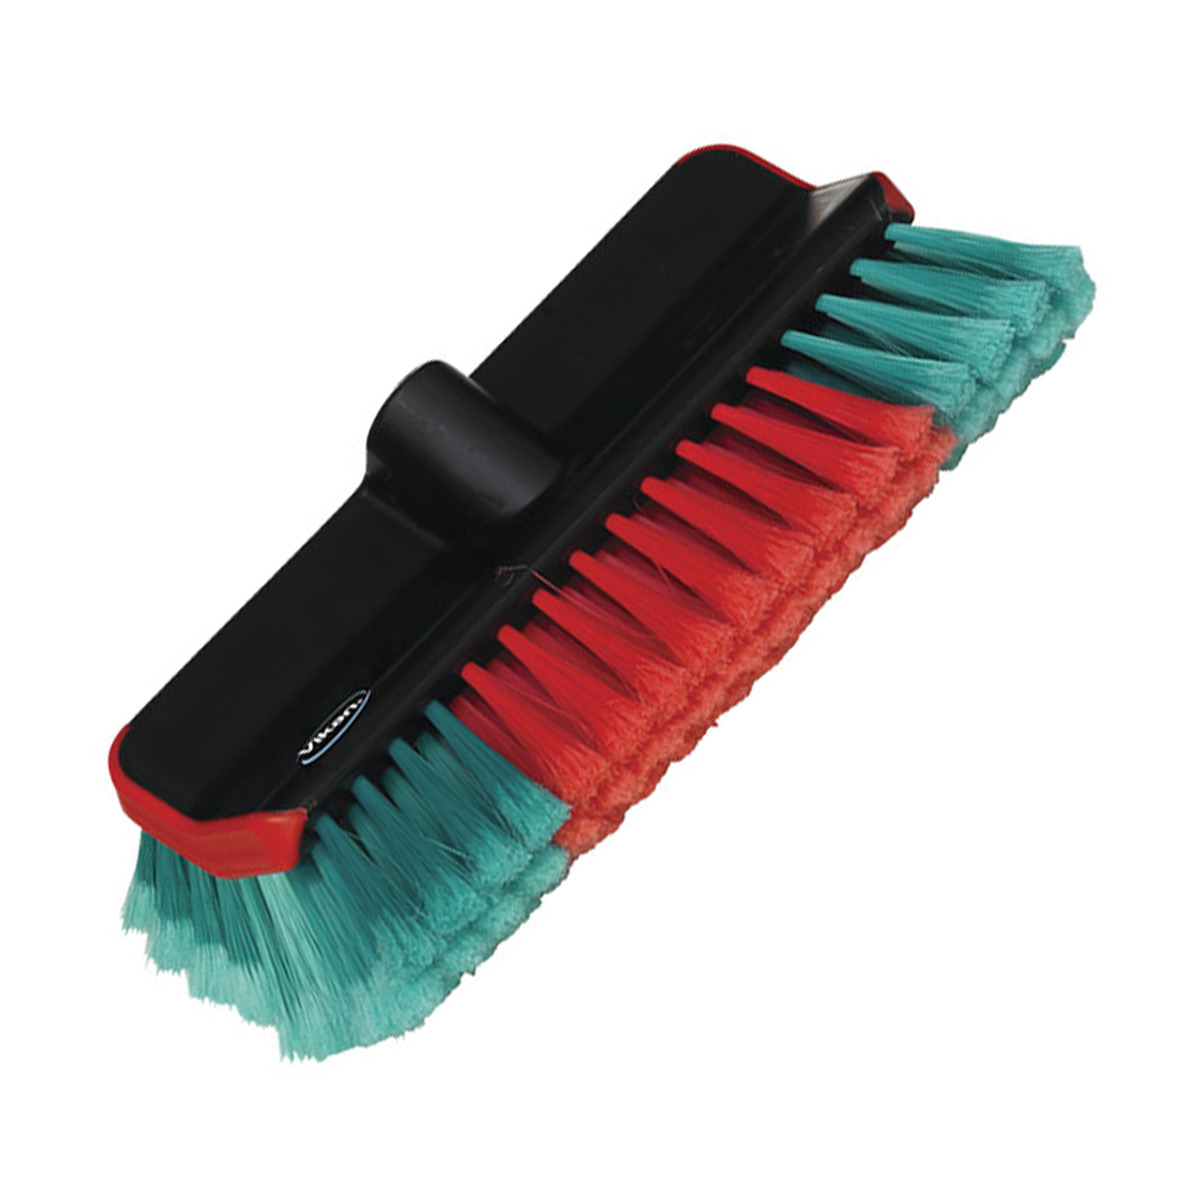 cleaning-equipment-brushware-vikan-vehicle-washing-brush-waterfed-high-low-280mm-unique-shaped-design-allows-excellent-soft-bristle-coverage-all-heights-vjs-distributors-28/T524752